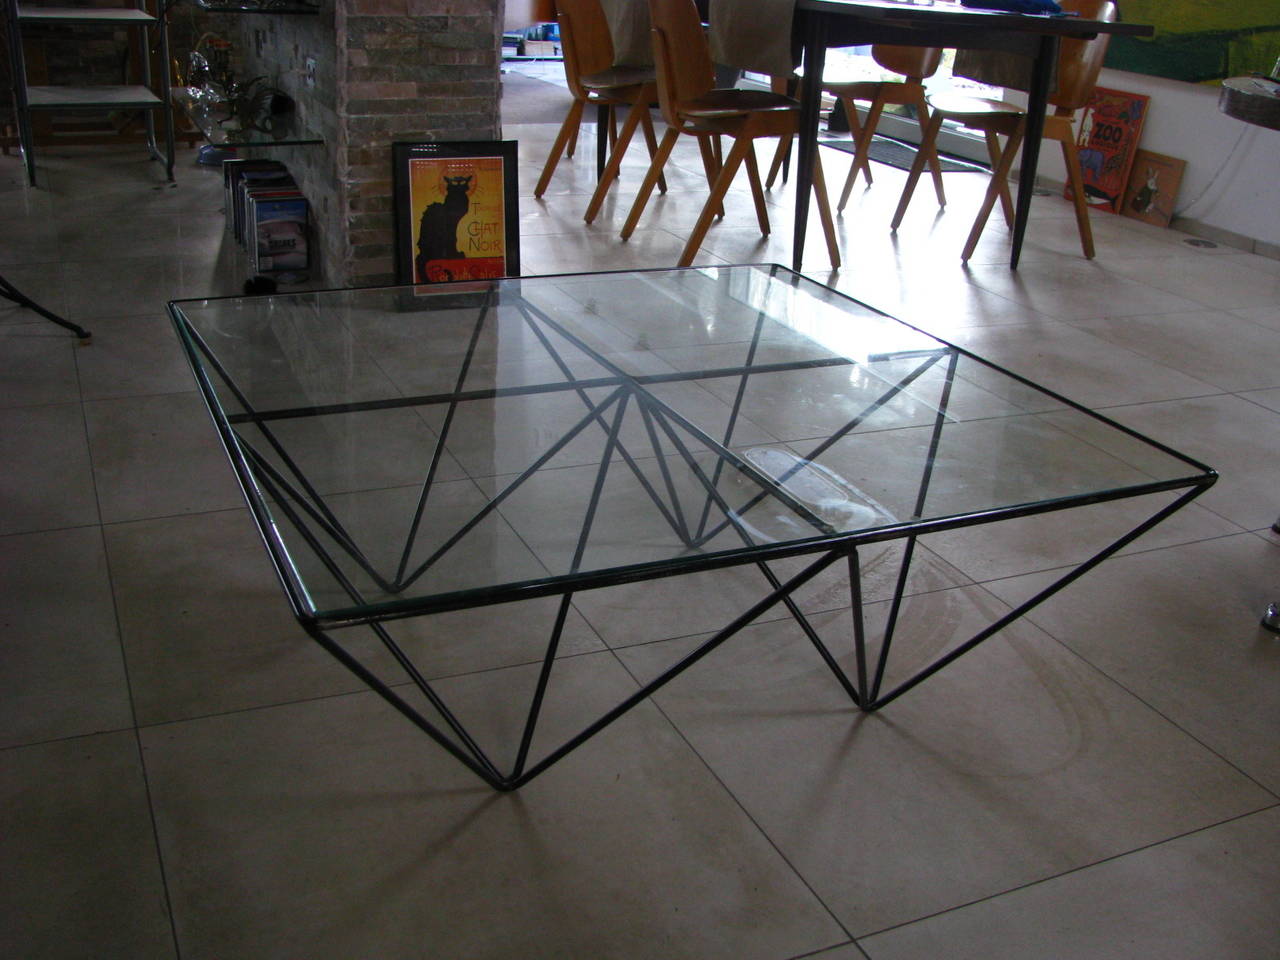 Paolo Piva Alanda coffee sofa table for B&B Italia, 1982.

The table consists of four inverted pyramids made of black lacquered steel rod creating a floating visual effect.

Good vintage condition, glass without chips.

Measures: Width: 38.6